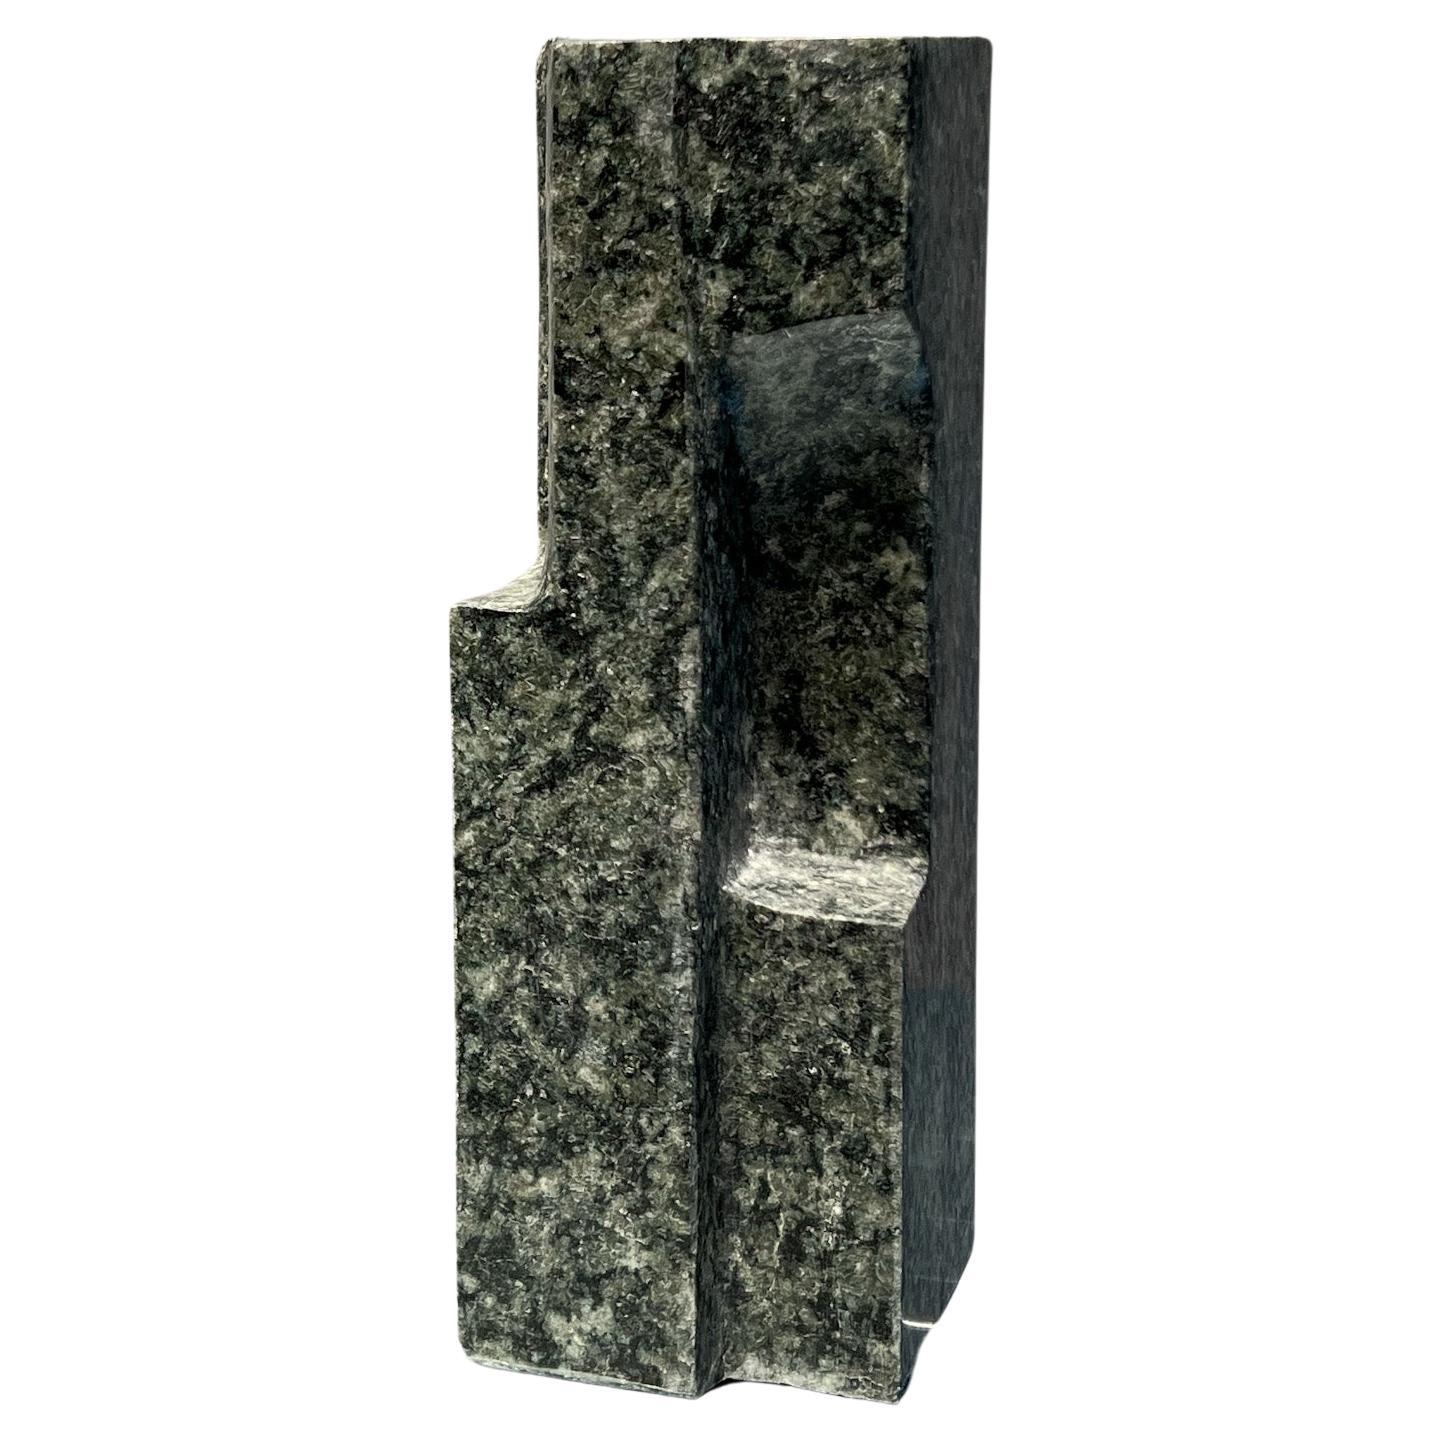 Brutalist abstract sculpture in green granite, Dutch, 1960s, Wotruba style For Sale